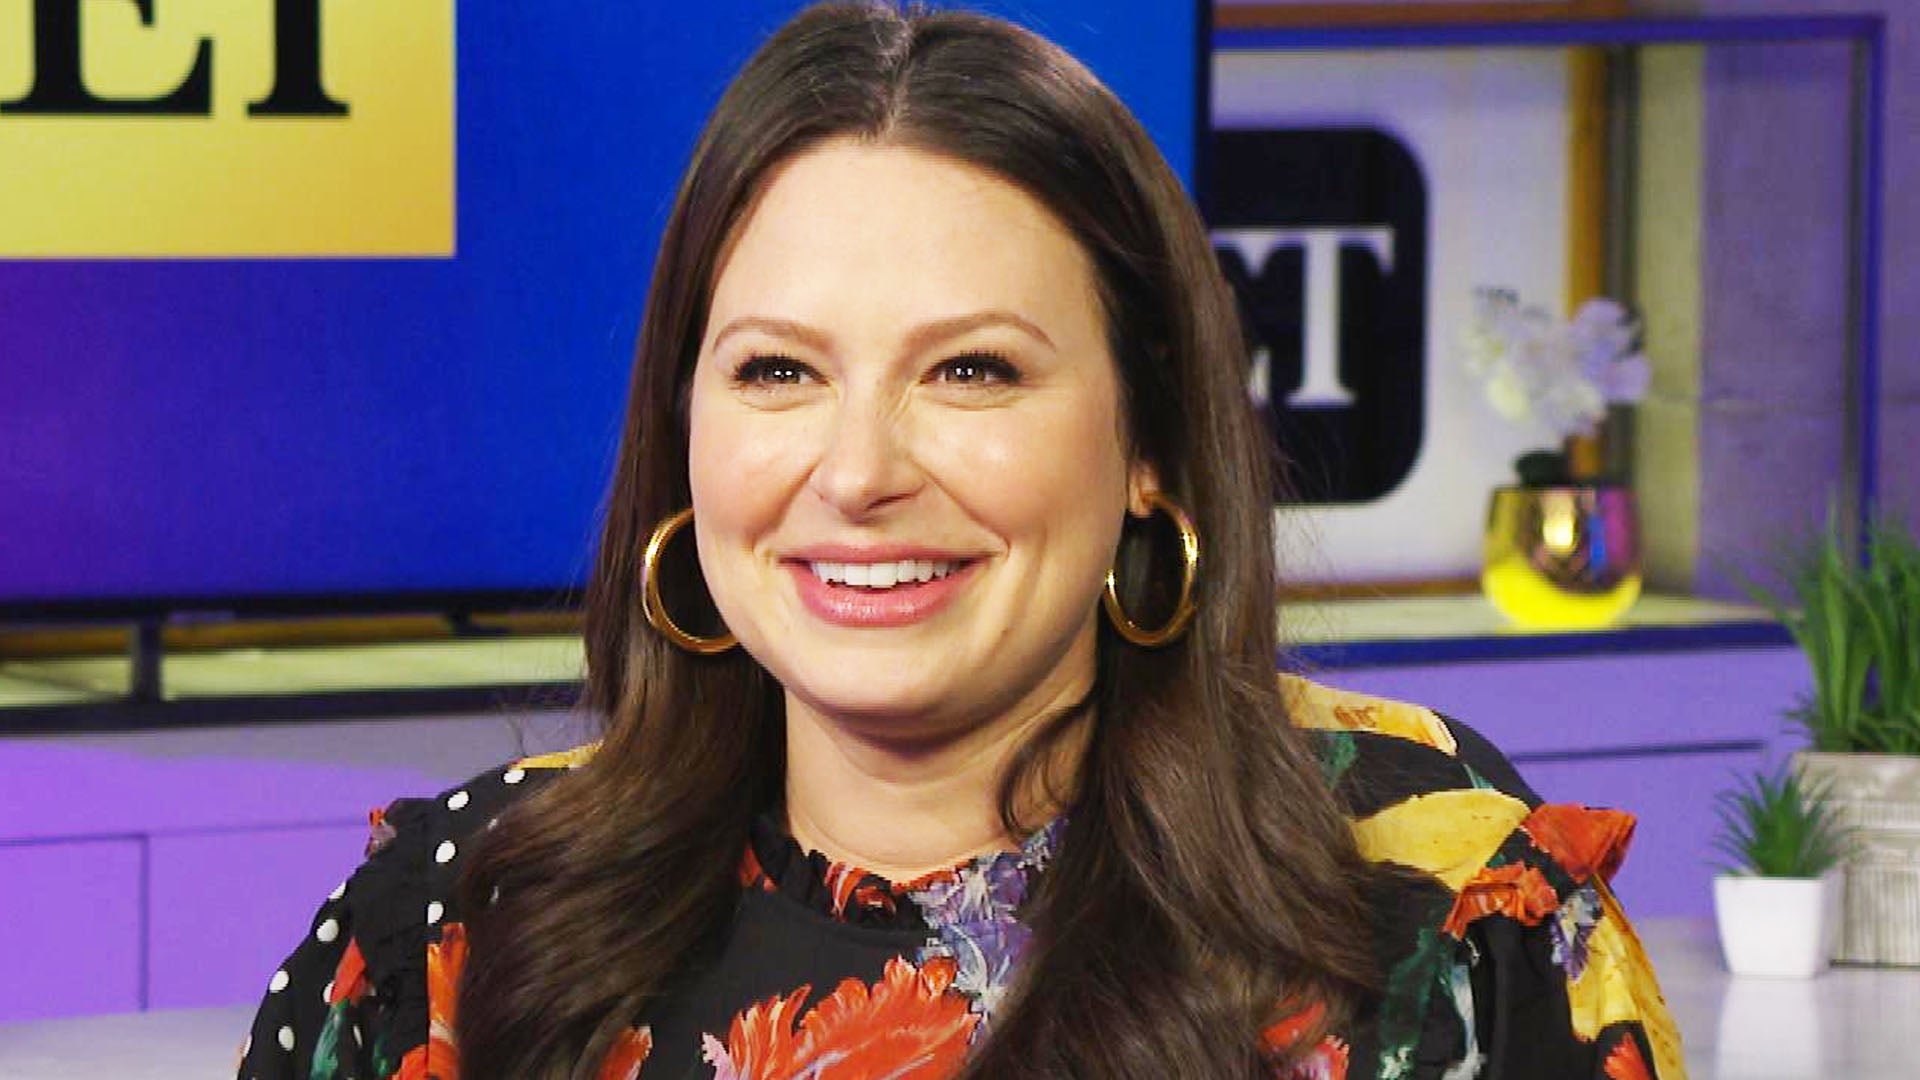 Scandal Star Katie Lowes Shares Behind-the-Scenes Look at New CBS Holiday Movie (Exclusive)